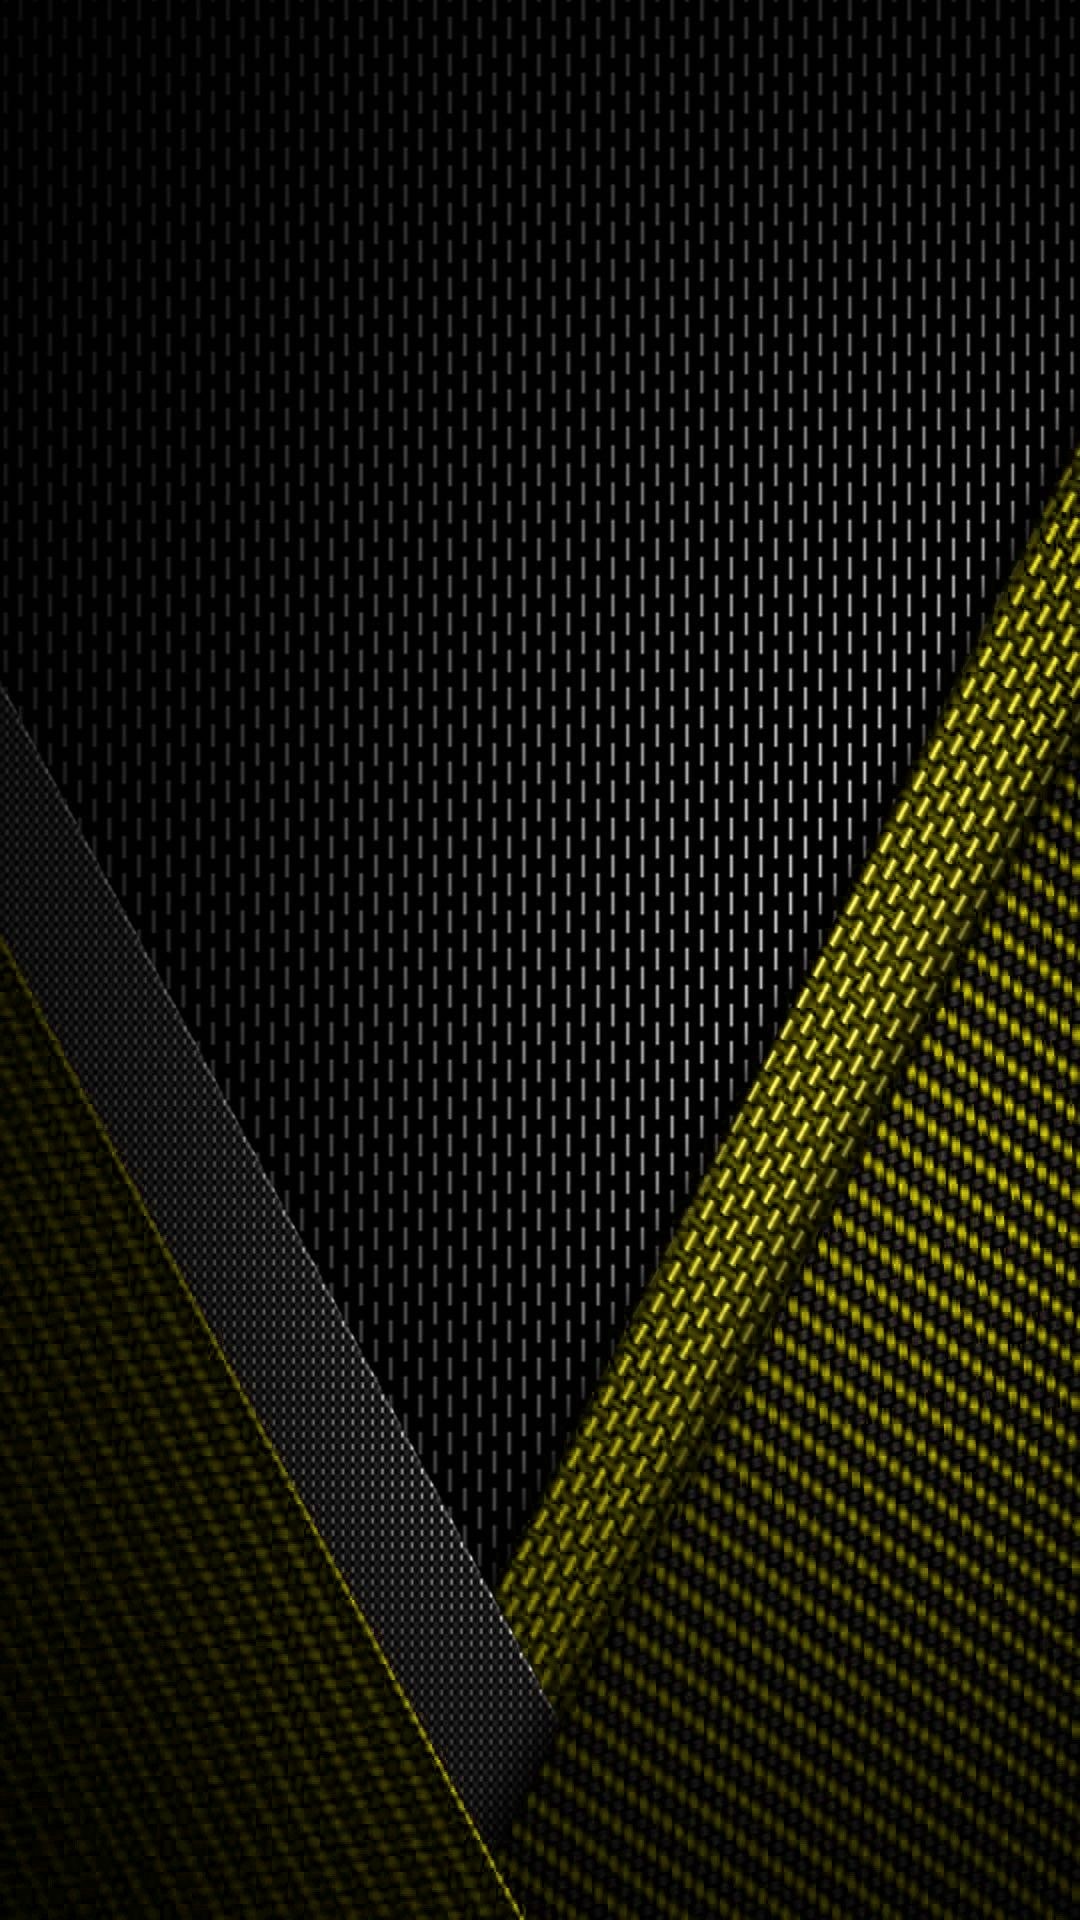 1080x1920 Plain Decoration Black And Yellow Wallpaper Textured Abstract Geometric